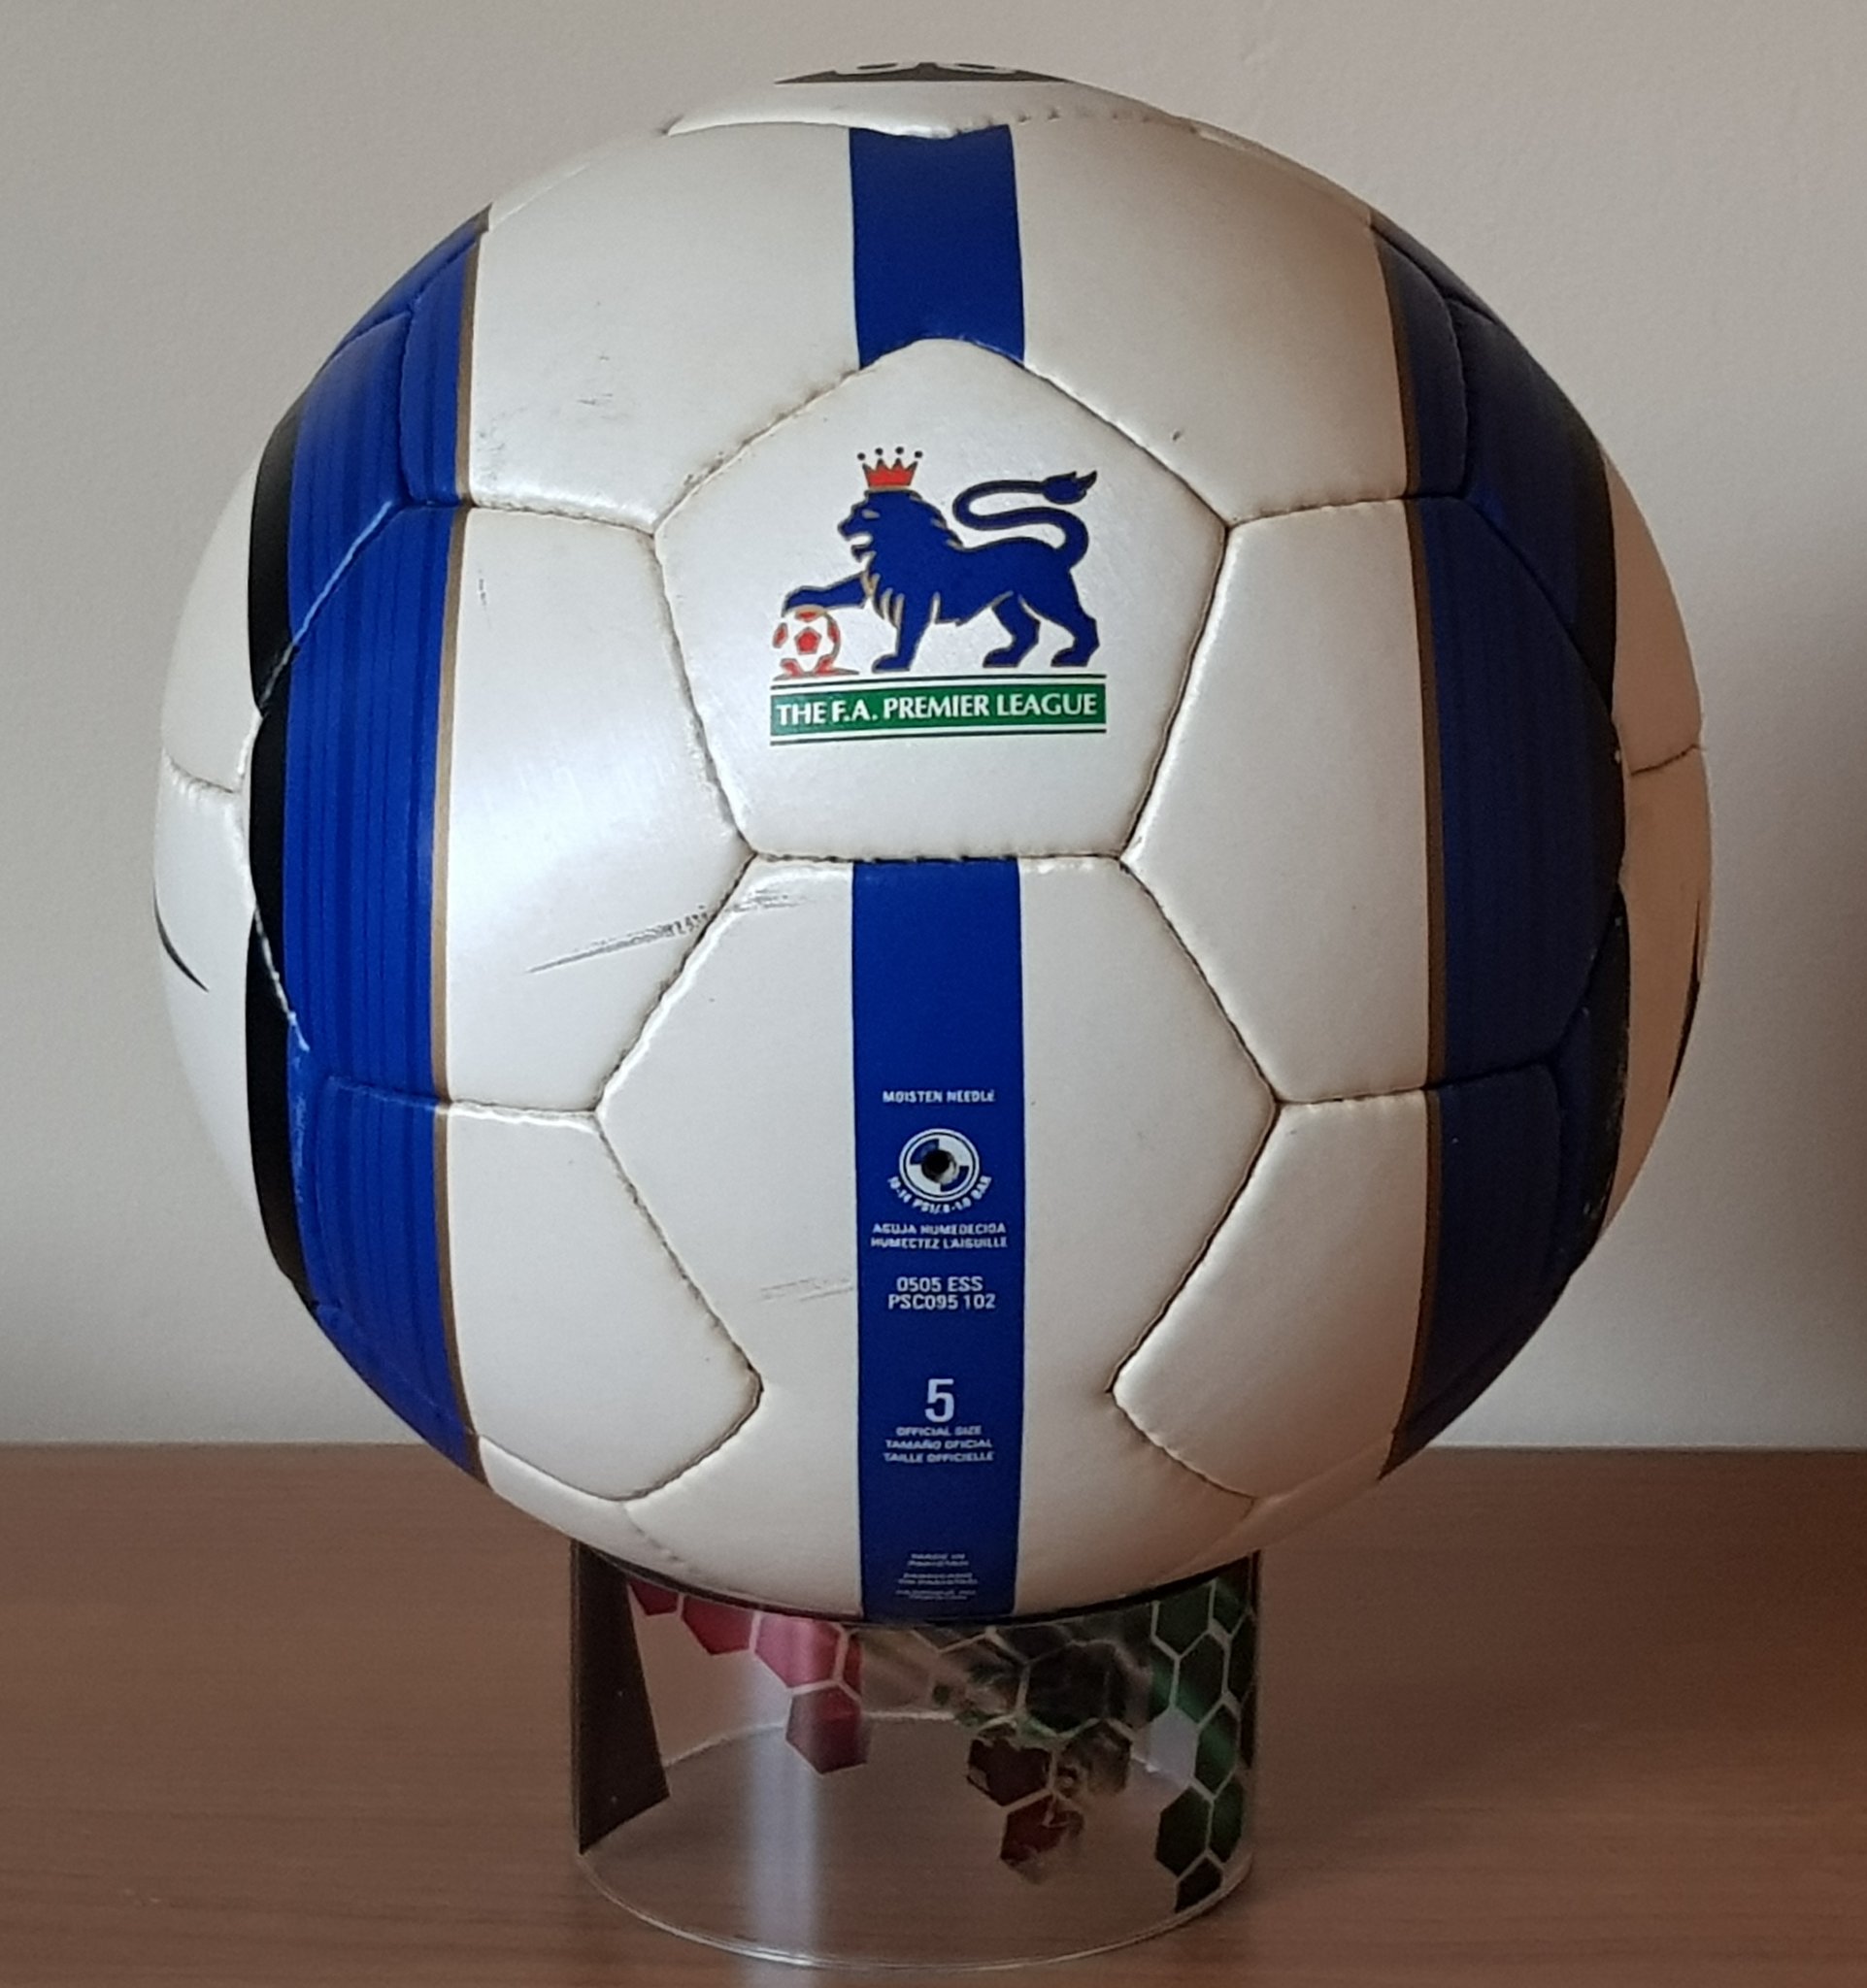 Rob Filby on Twitter: "Nike Total 90 Aerow English Barclays League Official Match Ball 2004/5 - Used #epl #niketotal90 #omb #90sfootball https://t.co/KxfXuJMMJD" / Twitter